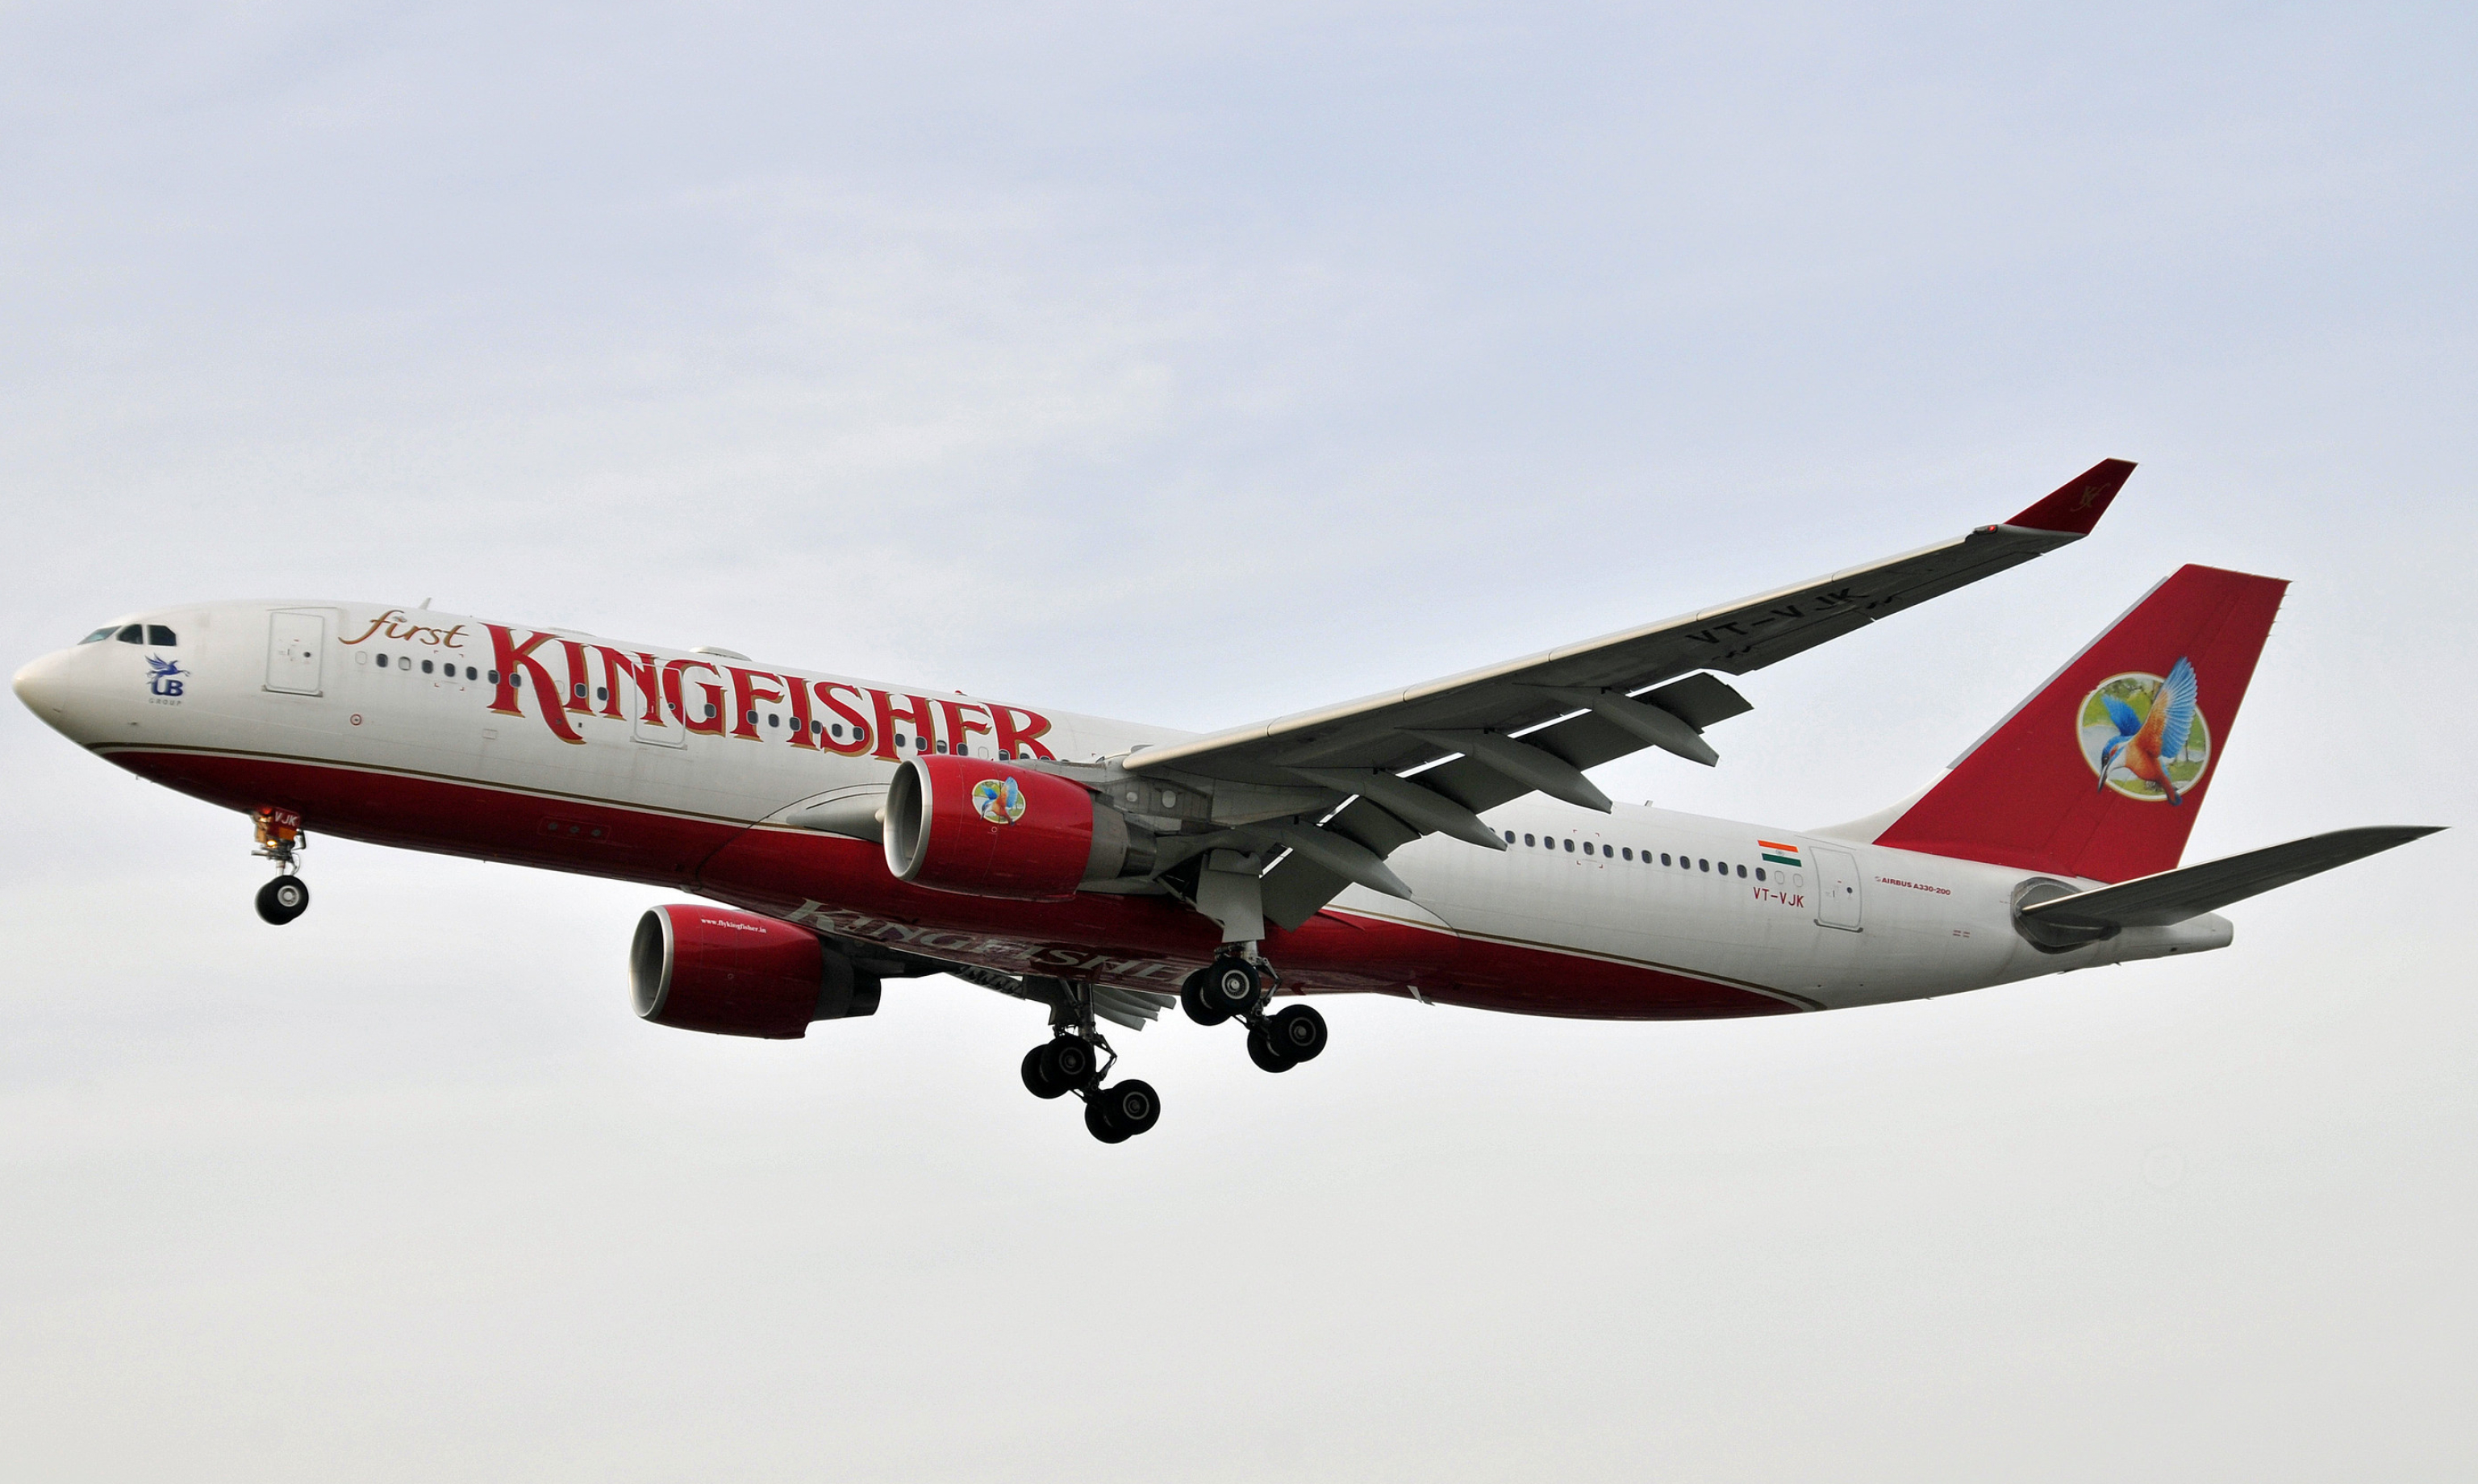 Kingfisher Airlines, Gullivair Airbus A330-223, Aviation enthusiasts, Aircraft enthusiasts, 3080x1840 HD Desktop